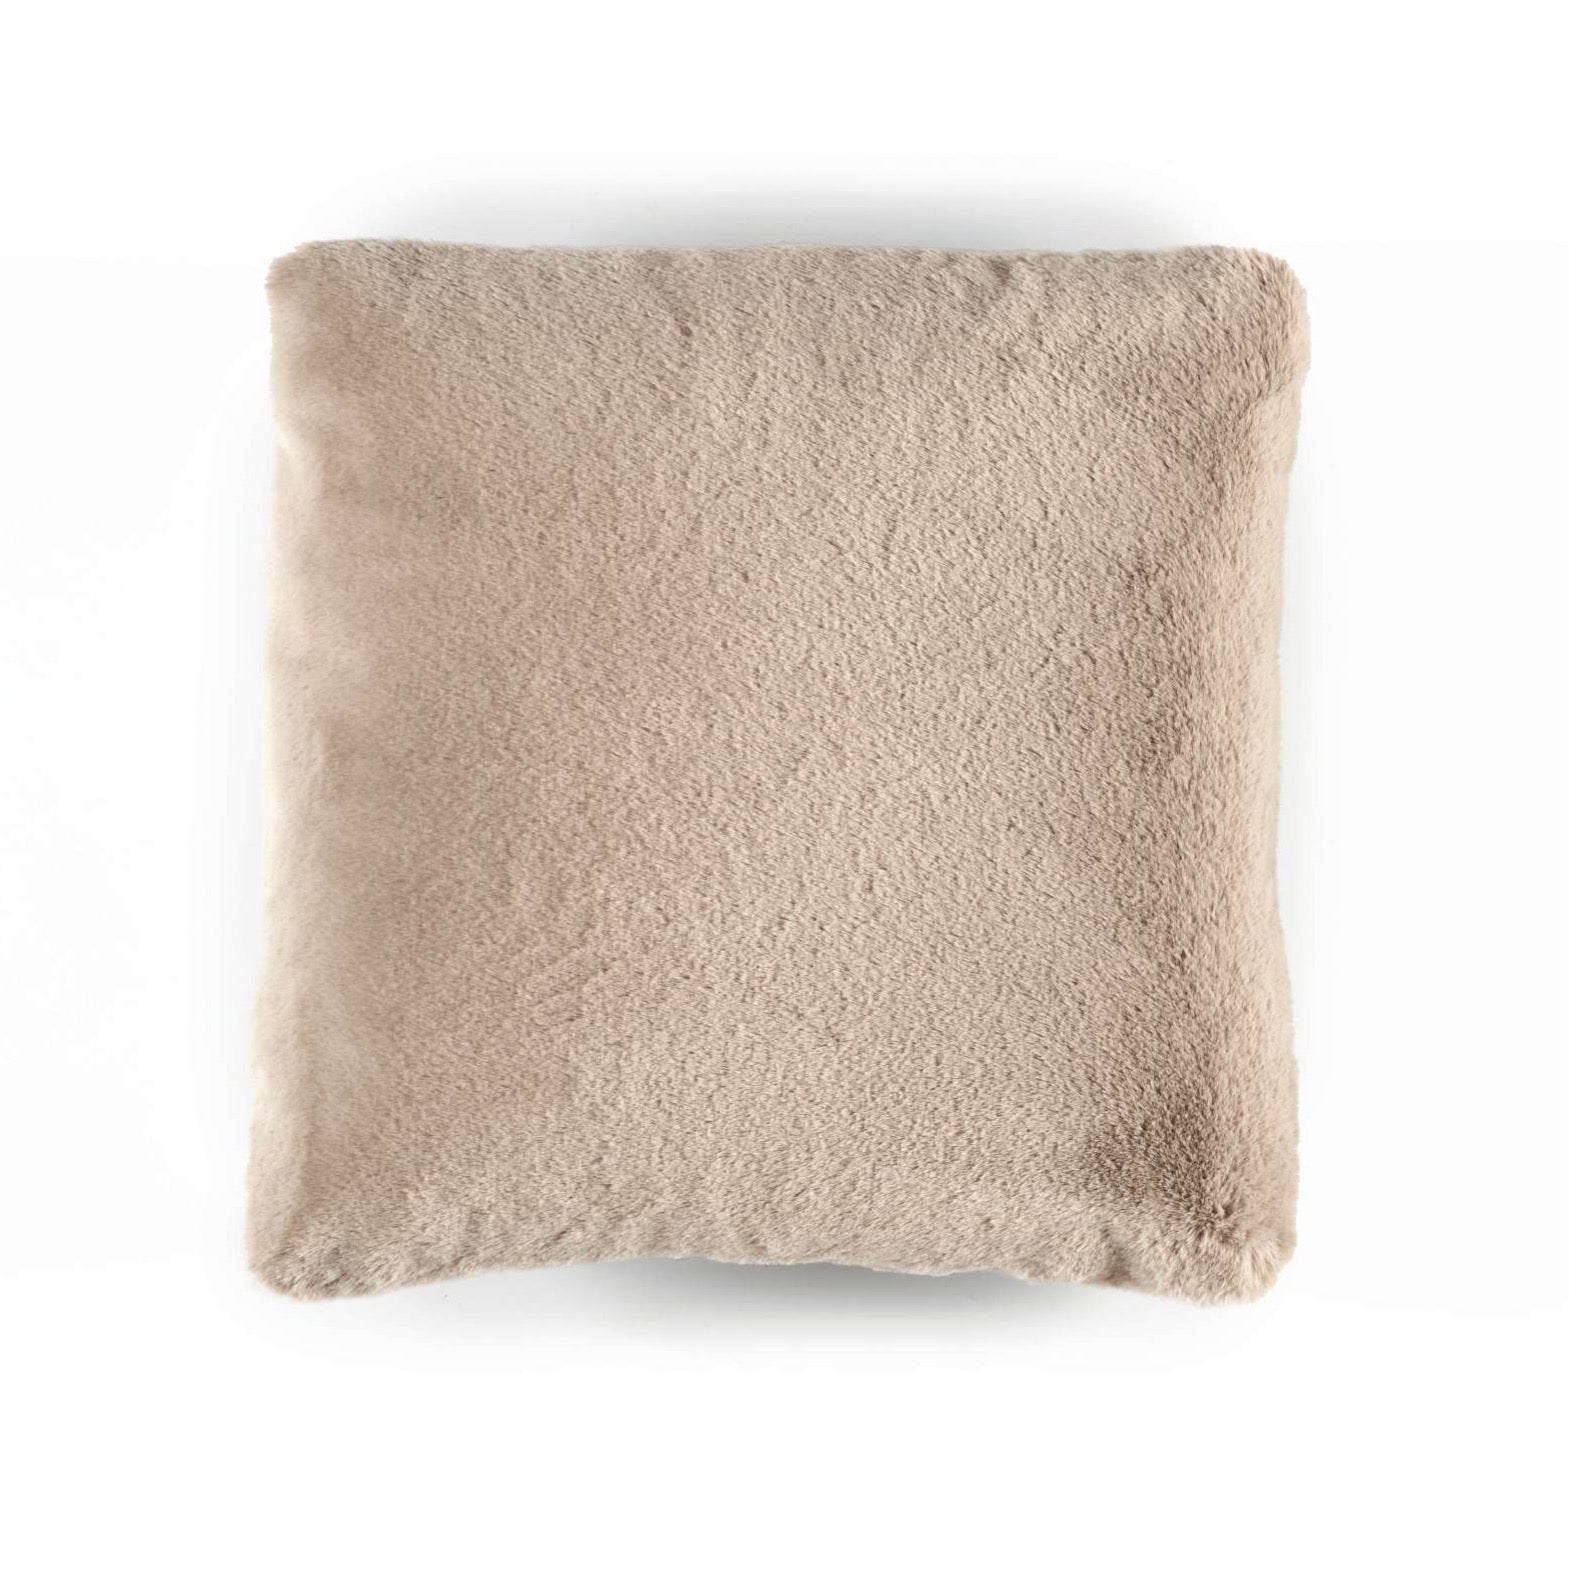 Winter CO 223 14 01 Sable Square Cushion Cover